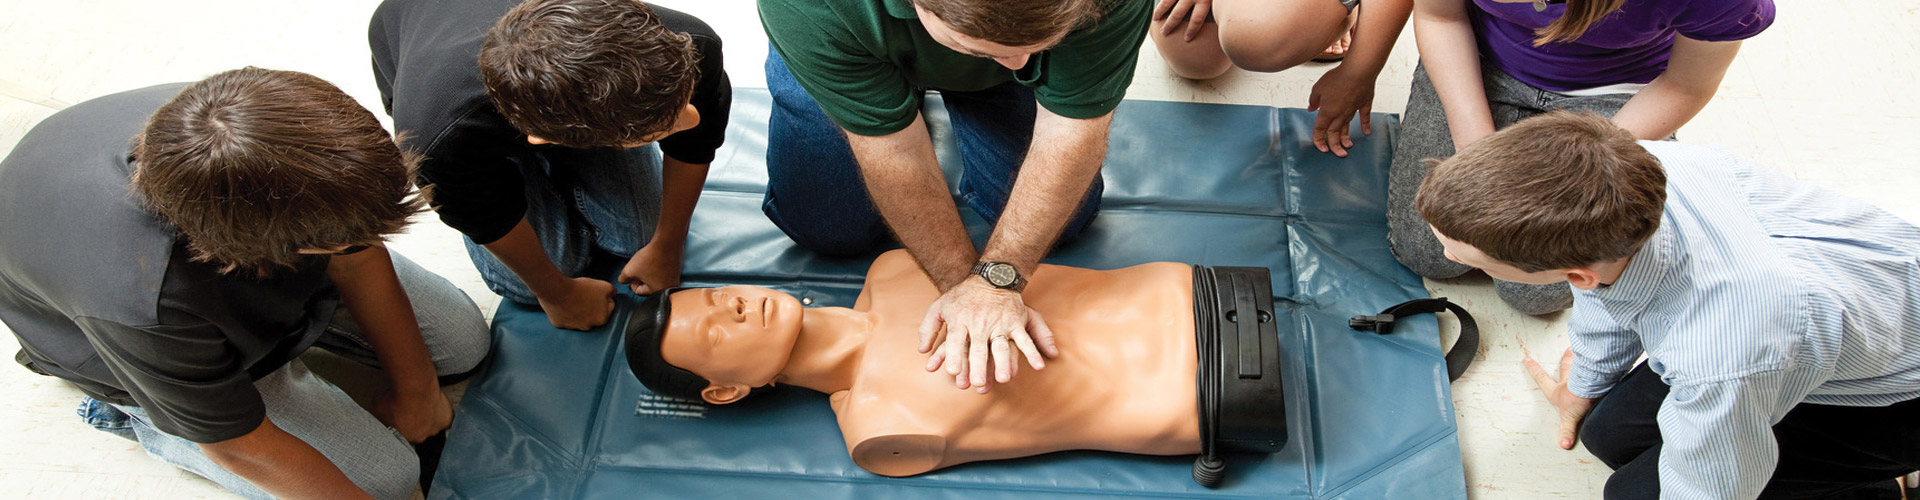 MJD Training | Professional Health & Safety and First Aid Courses